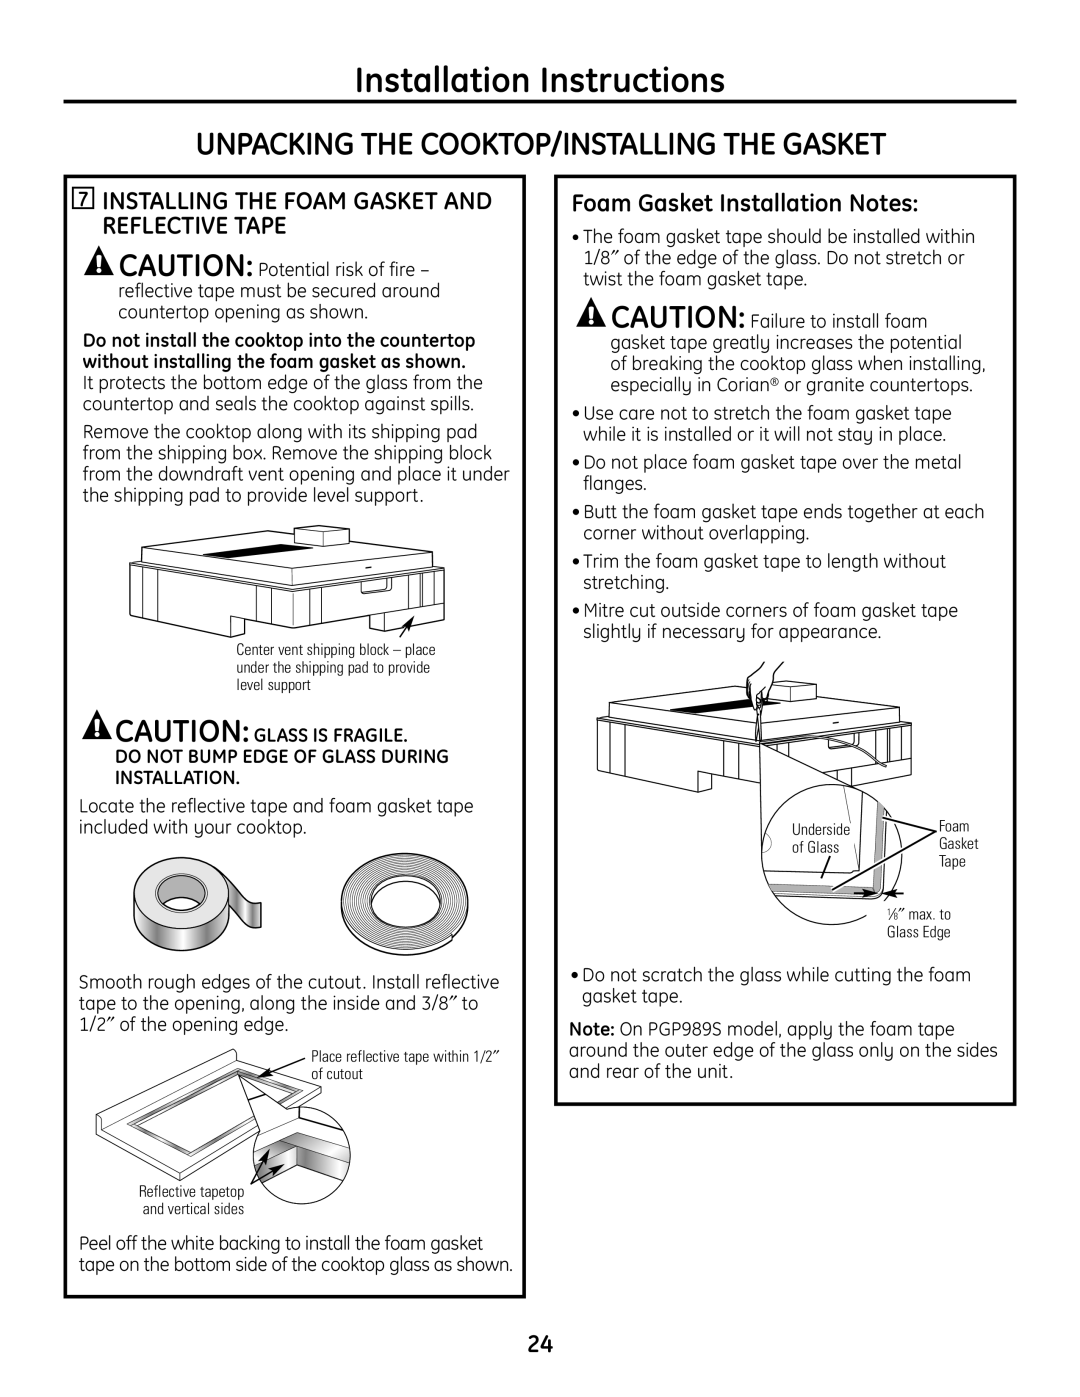 GE PGP989 manual Unpacking The Cooktop/Installing The Gasket, Installation Instructions, Foam Gasket Installation Notes 